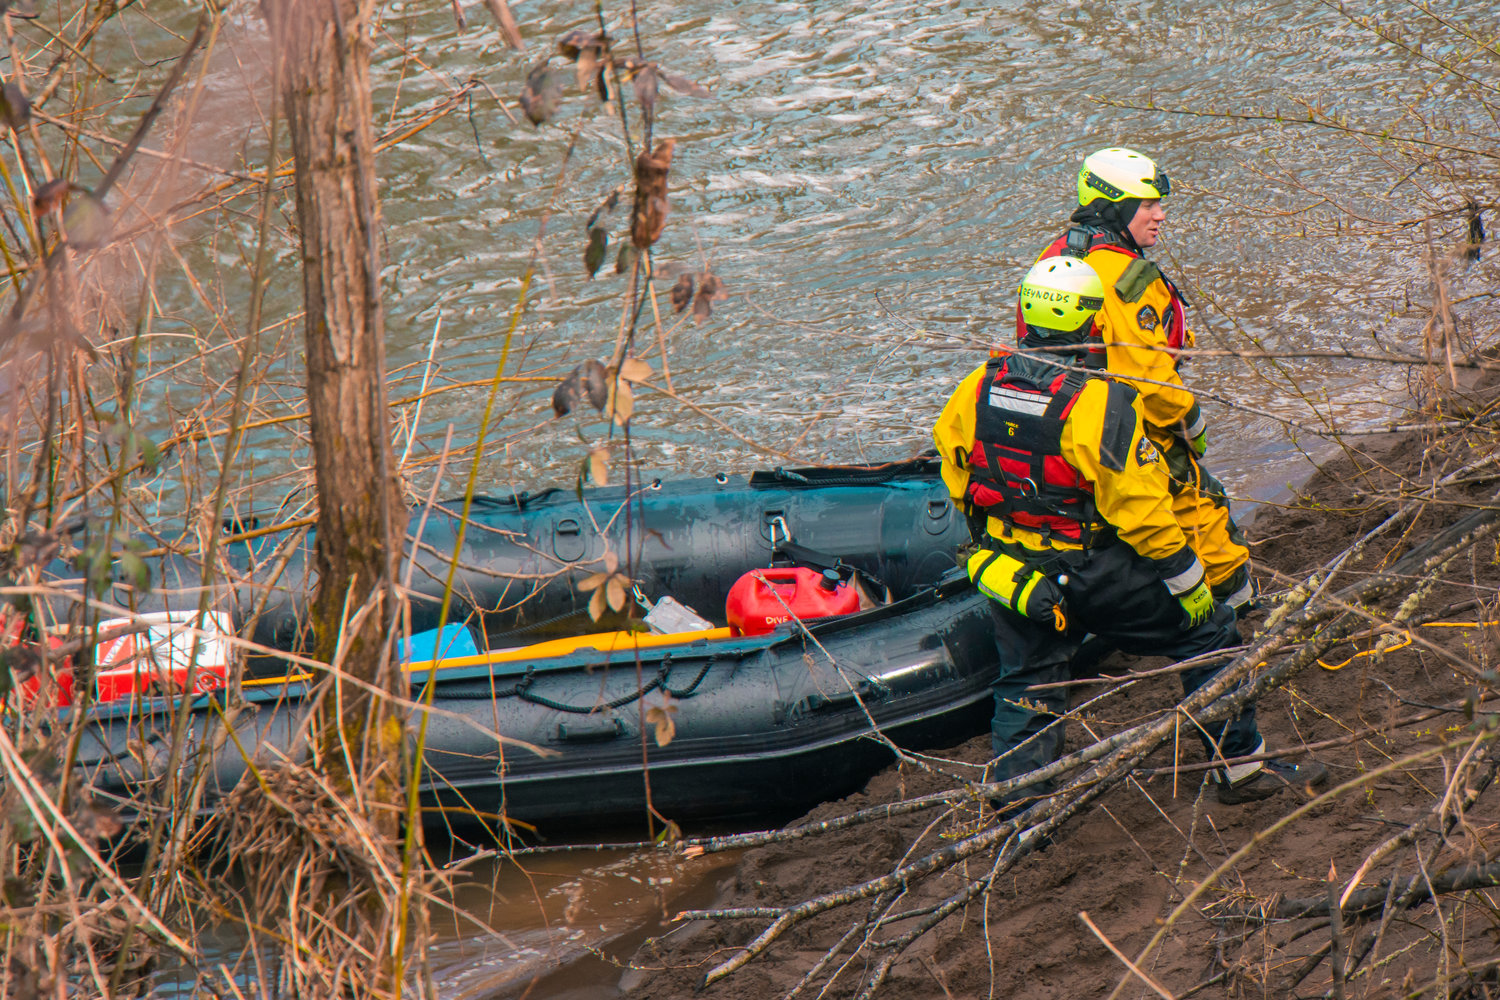 Members of the Thurston County Sheriff Dive and Rescue crew stand on the bank of the Chehalis River during a search for missing teen Zach Hines-Rager in Adna.